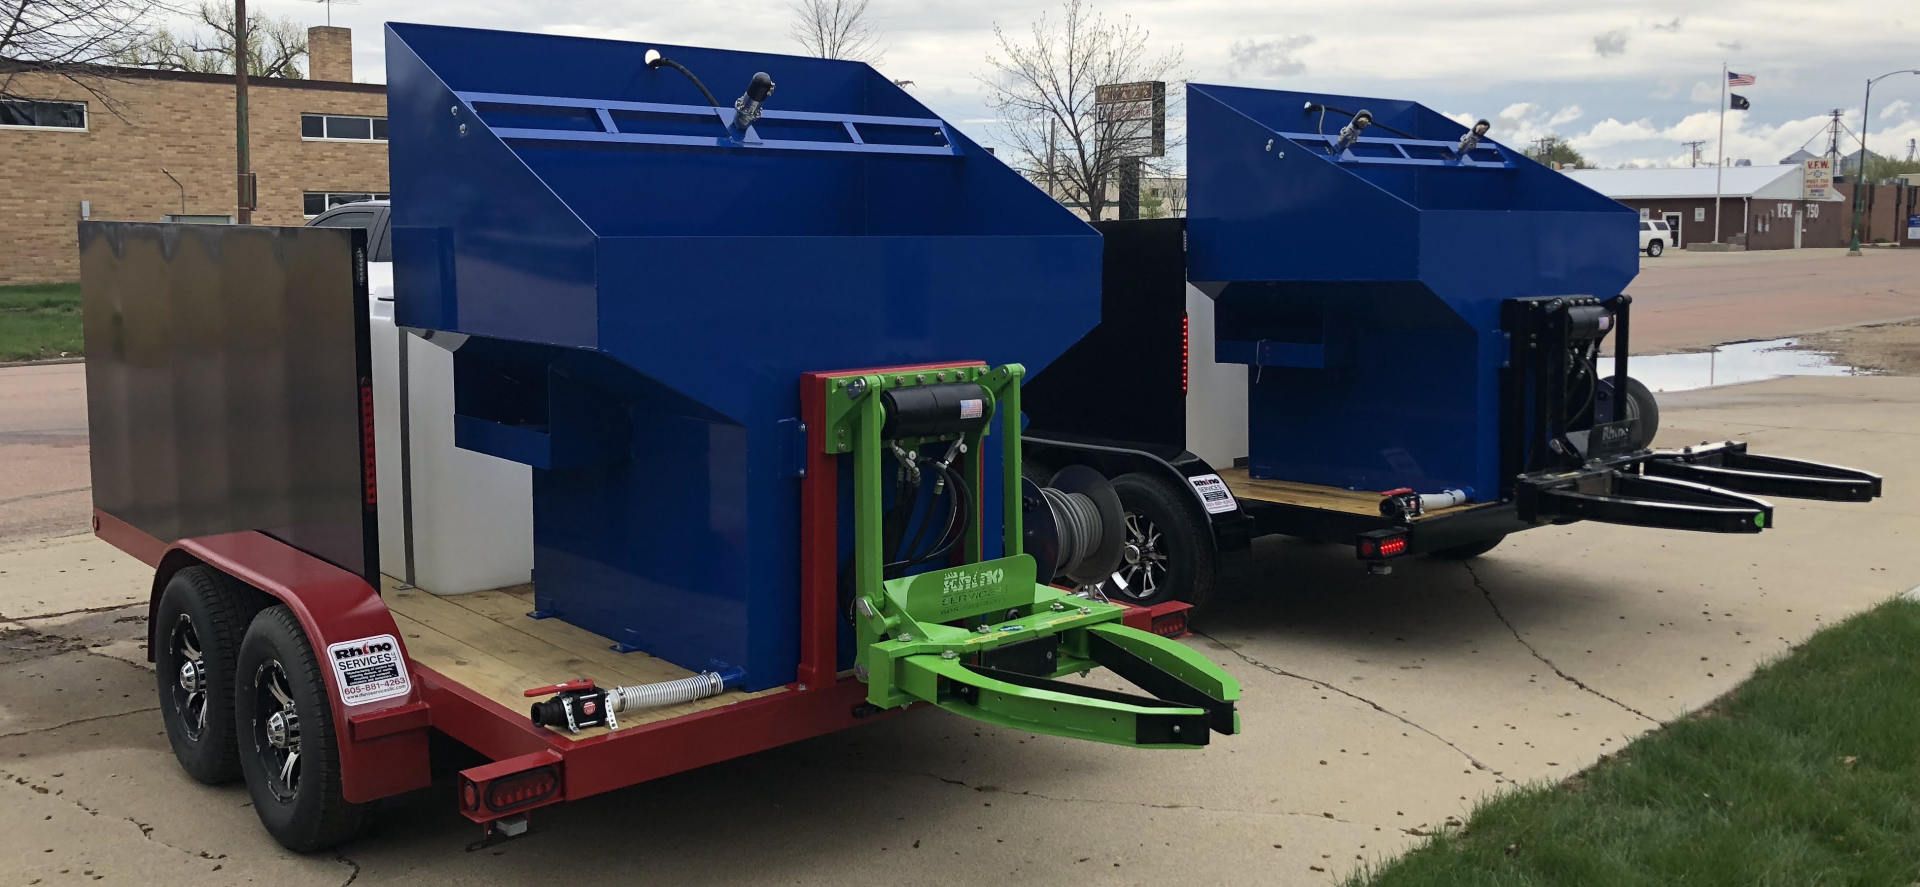 truck with bin cleaning equipment